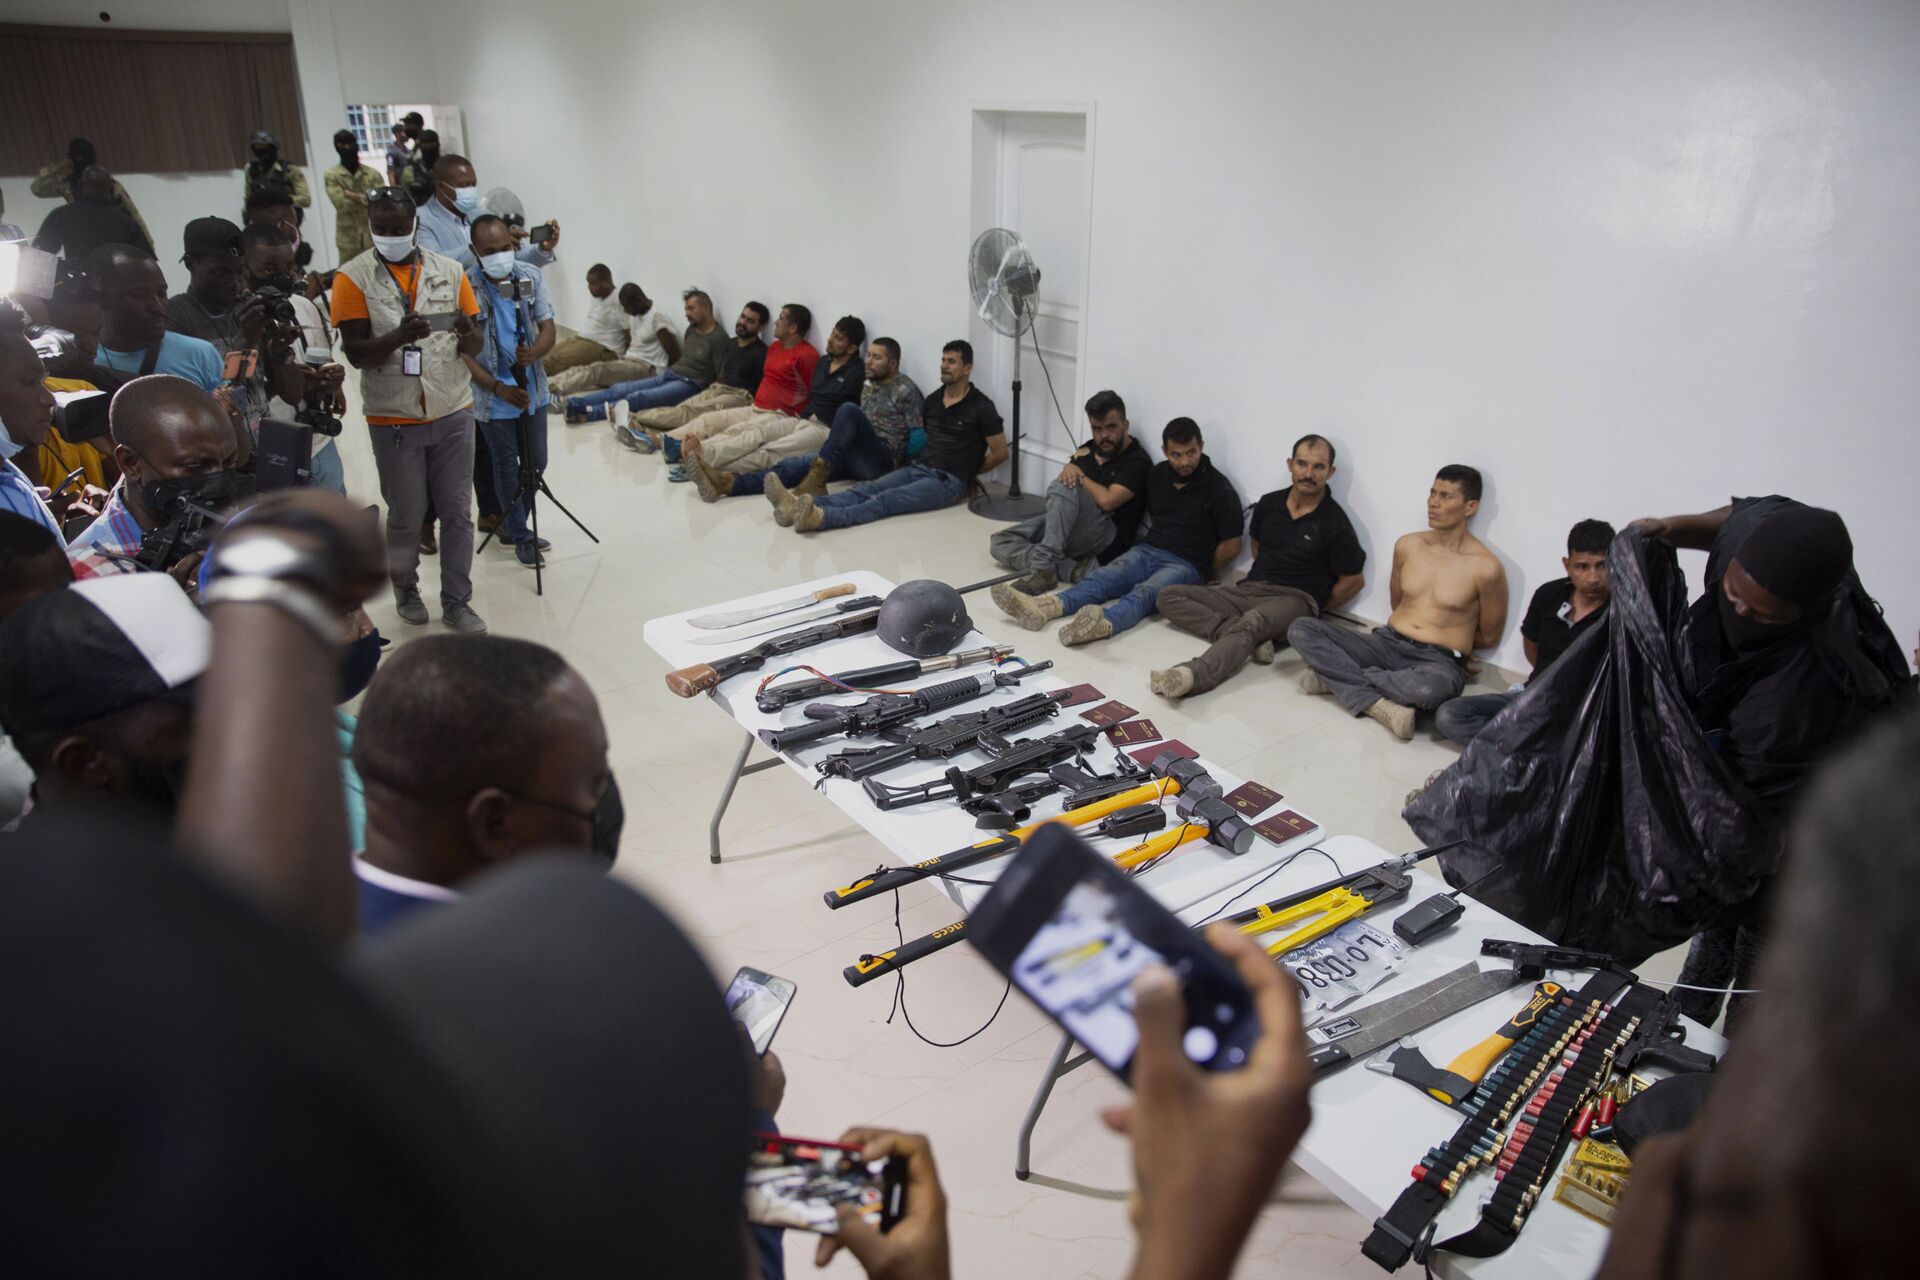 Suspects in the assassination of Haiti's President Jovenel Moise are shown to the media, along with the weapons and equipment they allegedly used in the attack, at the General Direction of the police in Port-au-Prince, Haiti, Thursday, July 8, 2021. - Sputnik International, 1920, 07.09.2021